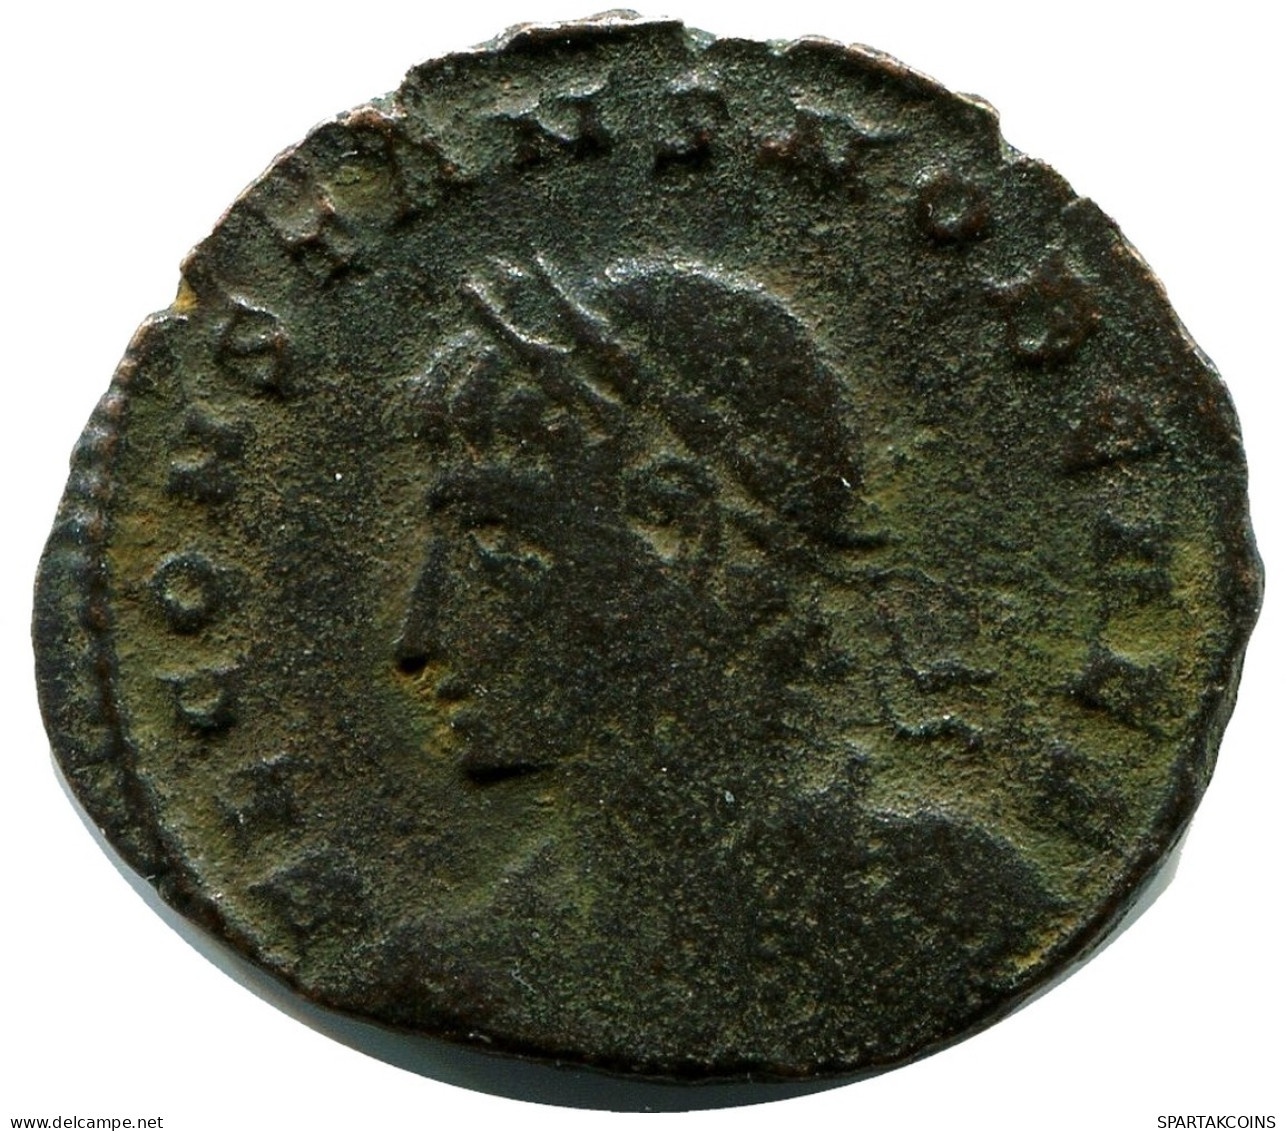 CONSTANS MINTED IN CONSTANTINOPLE FOUND IN IHNASYAH HOARD EGYPT #ANC11944.14.U.A - The Christian Empire (307 AD Tot 363 AD)